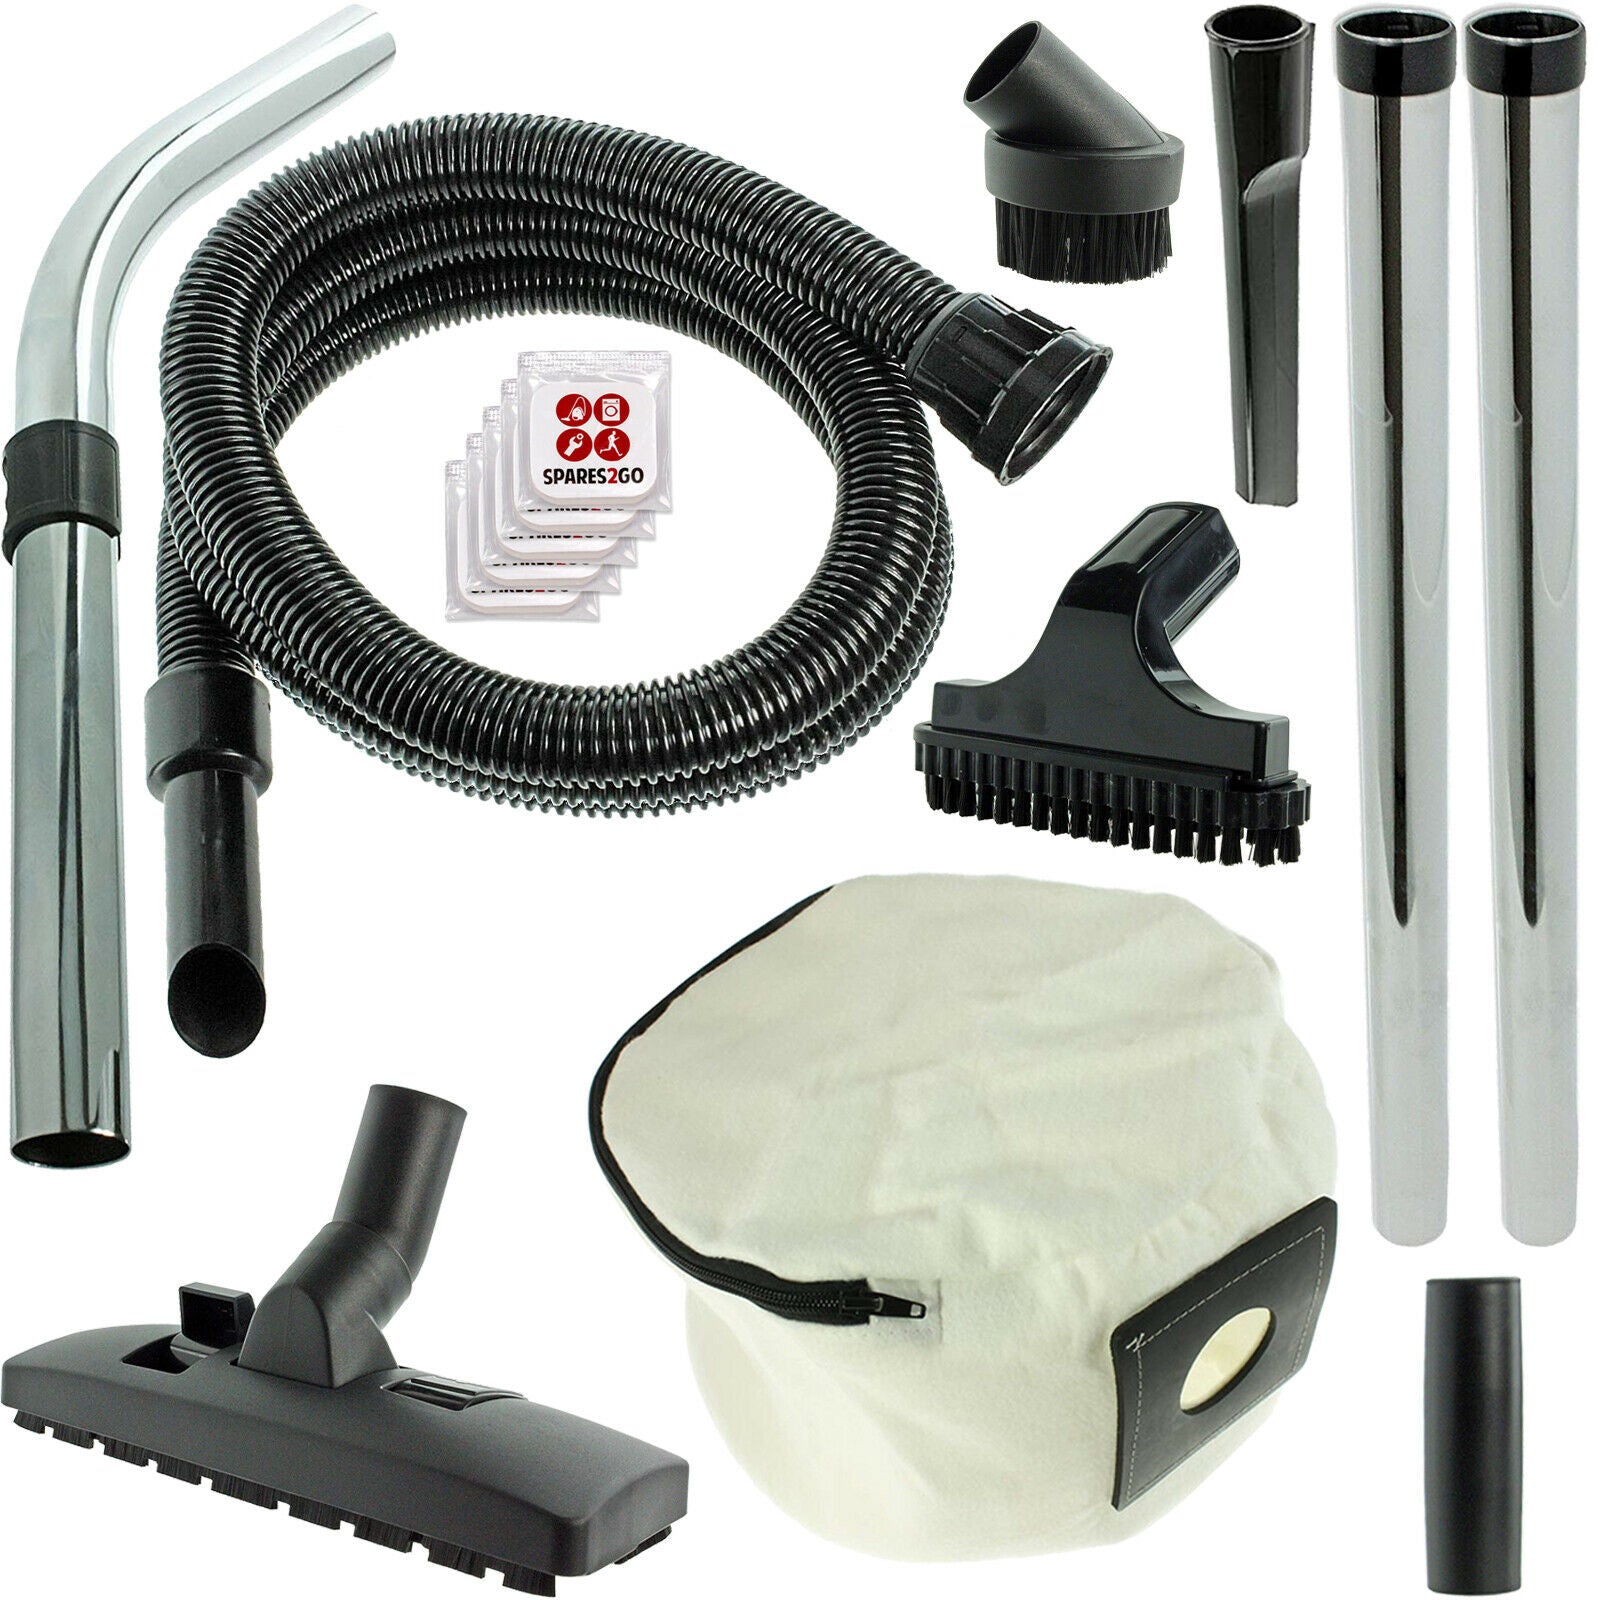 SPARES2GO Spare Parts Tool Kit Hose 2.5m Reusable Zip Bag For Numatic Henry Hetty James Vacuum Cleaner + Fresheners